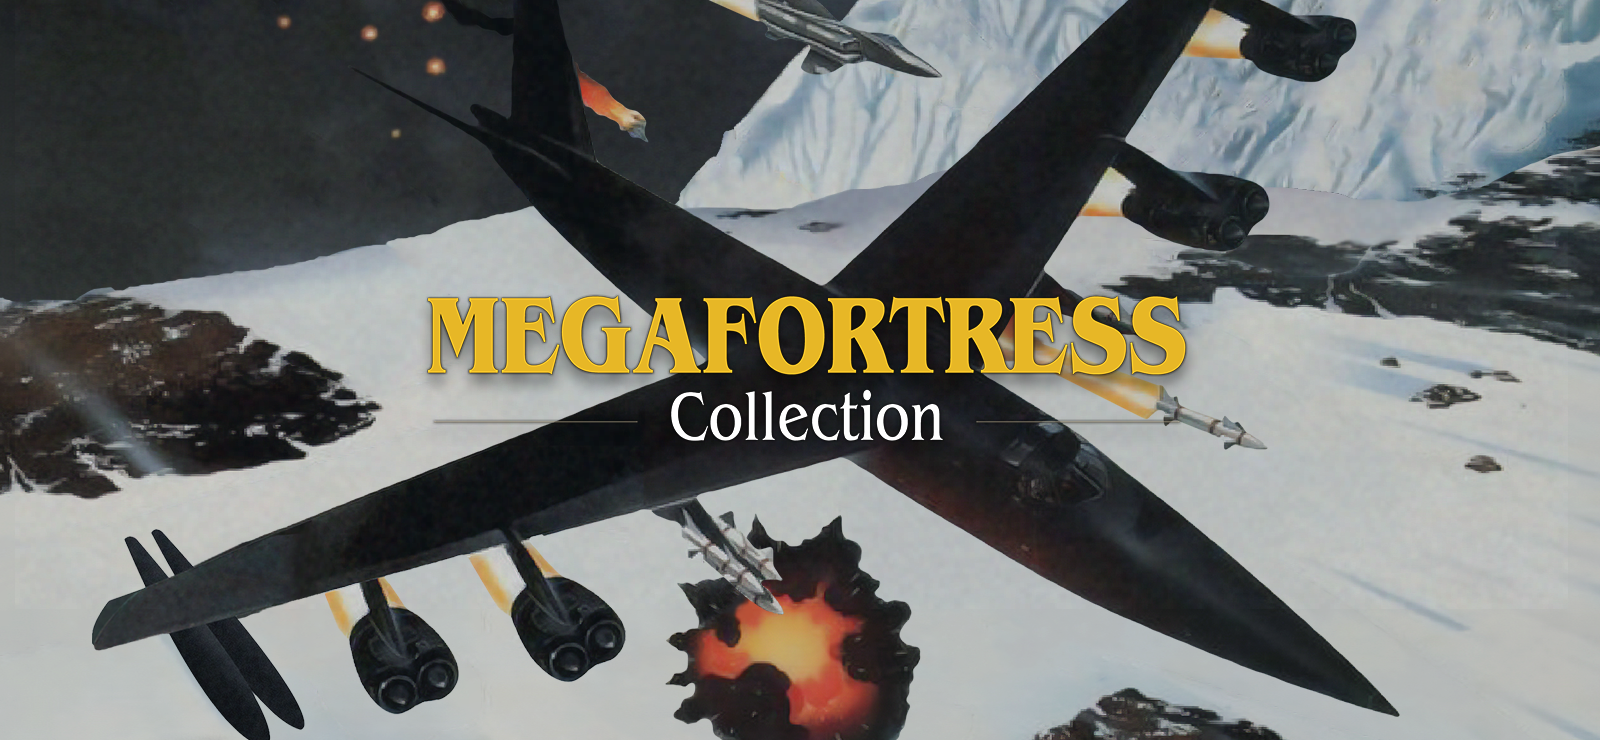 Megafortress Collection